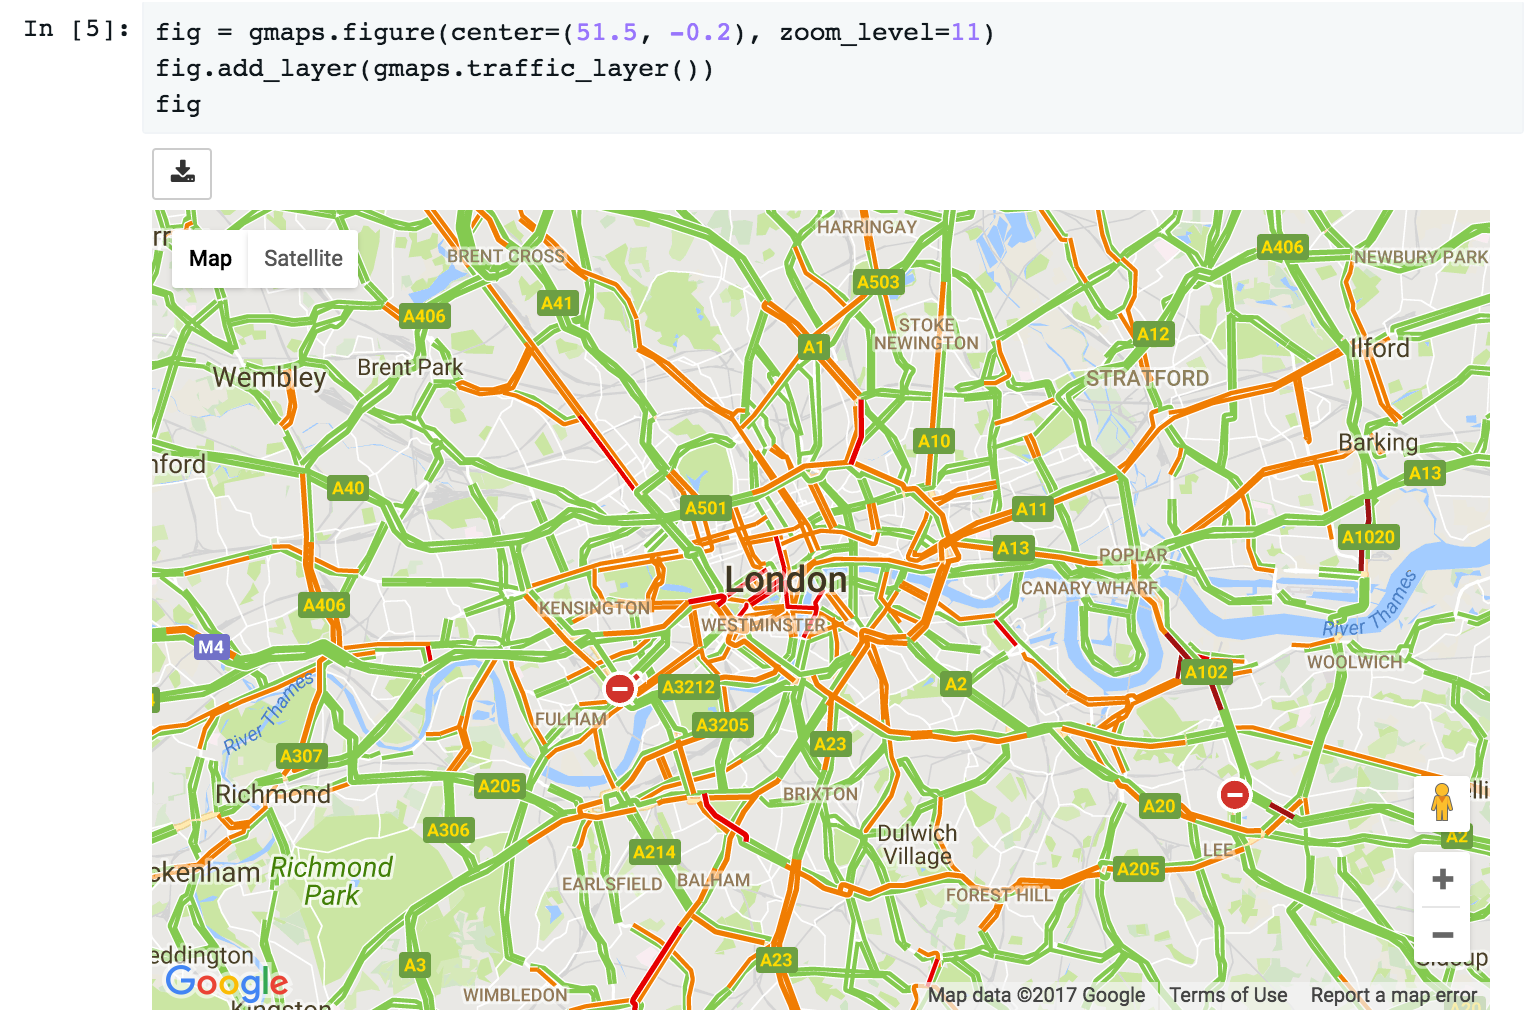 _images/traffic-layer.png